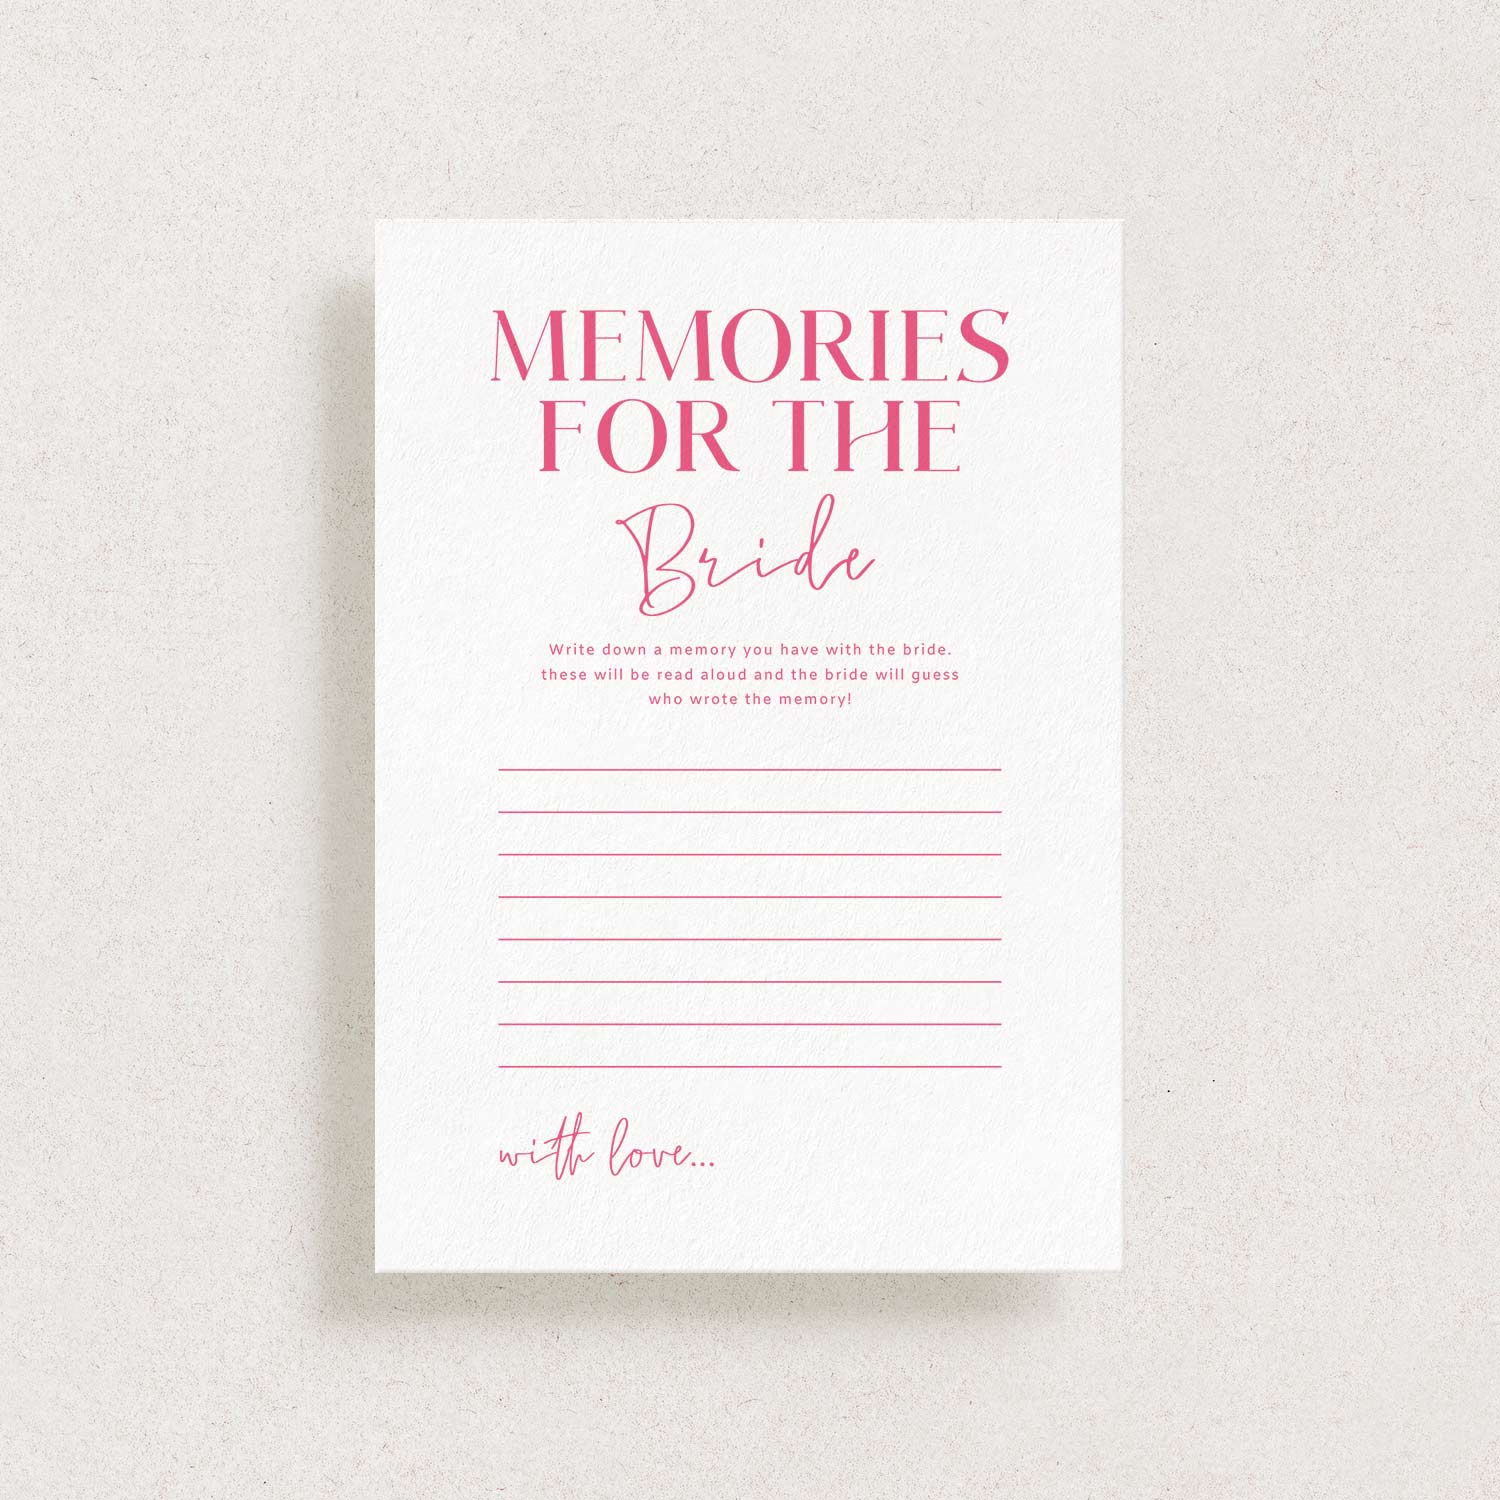 Memories of The Bride Game Download, Pretty In Pink